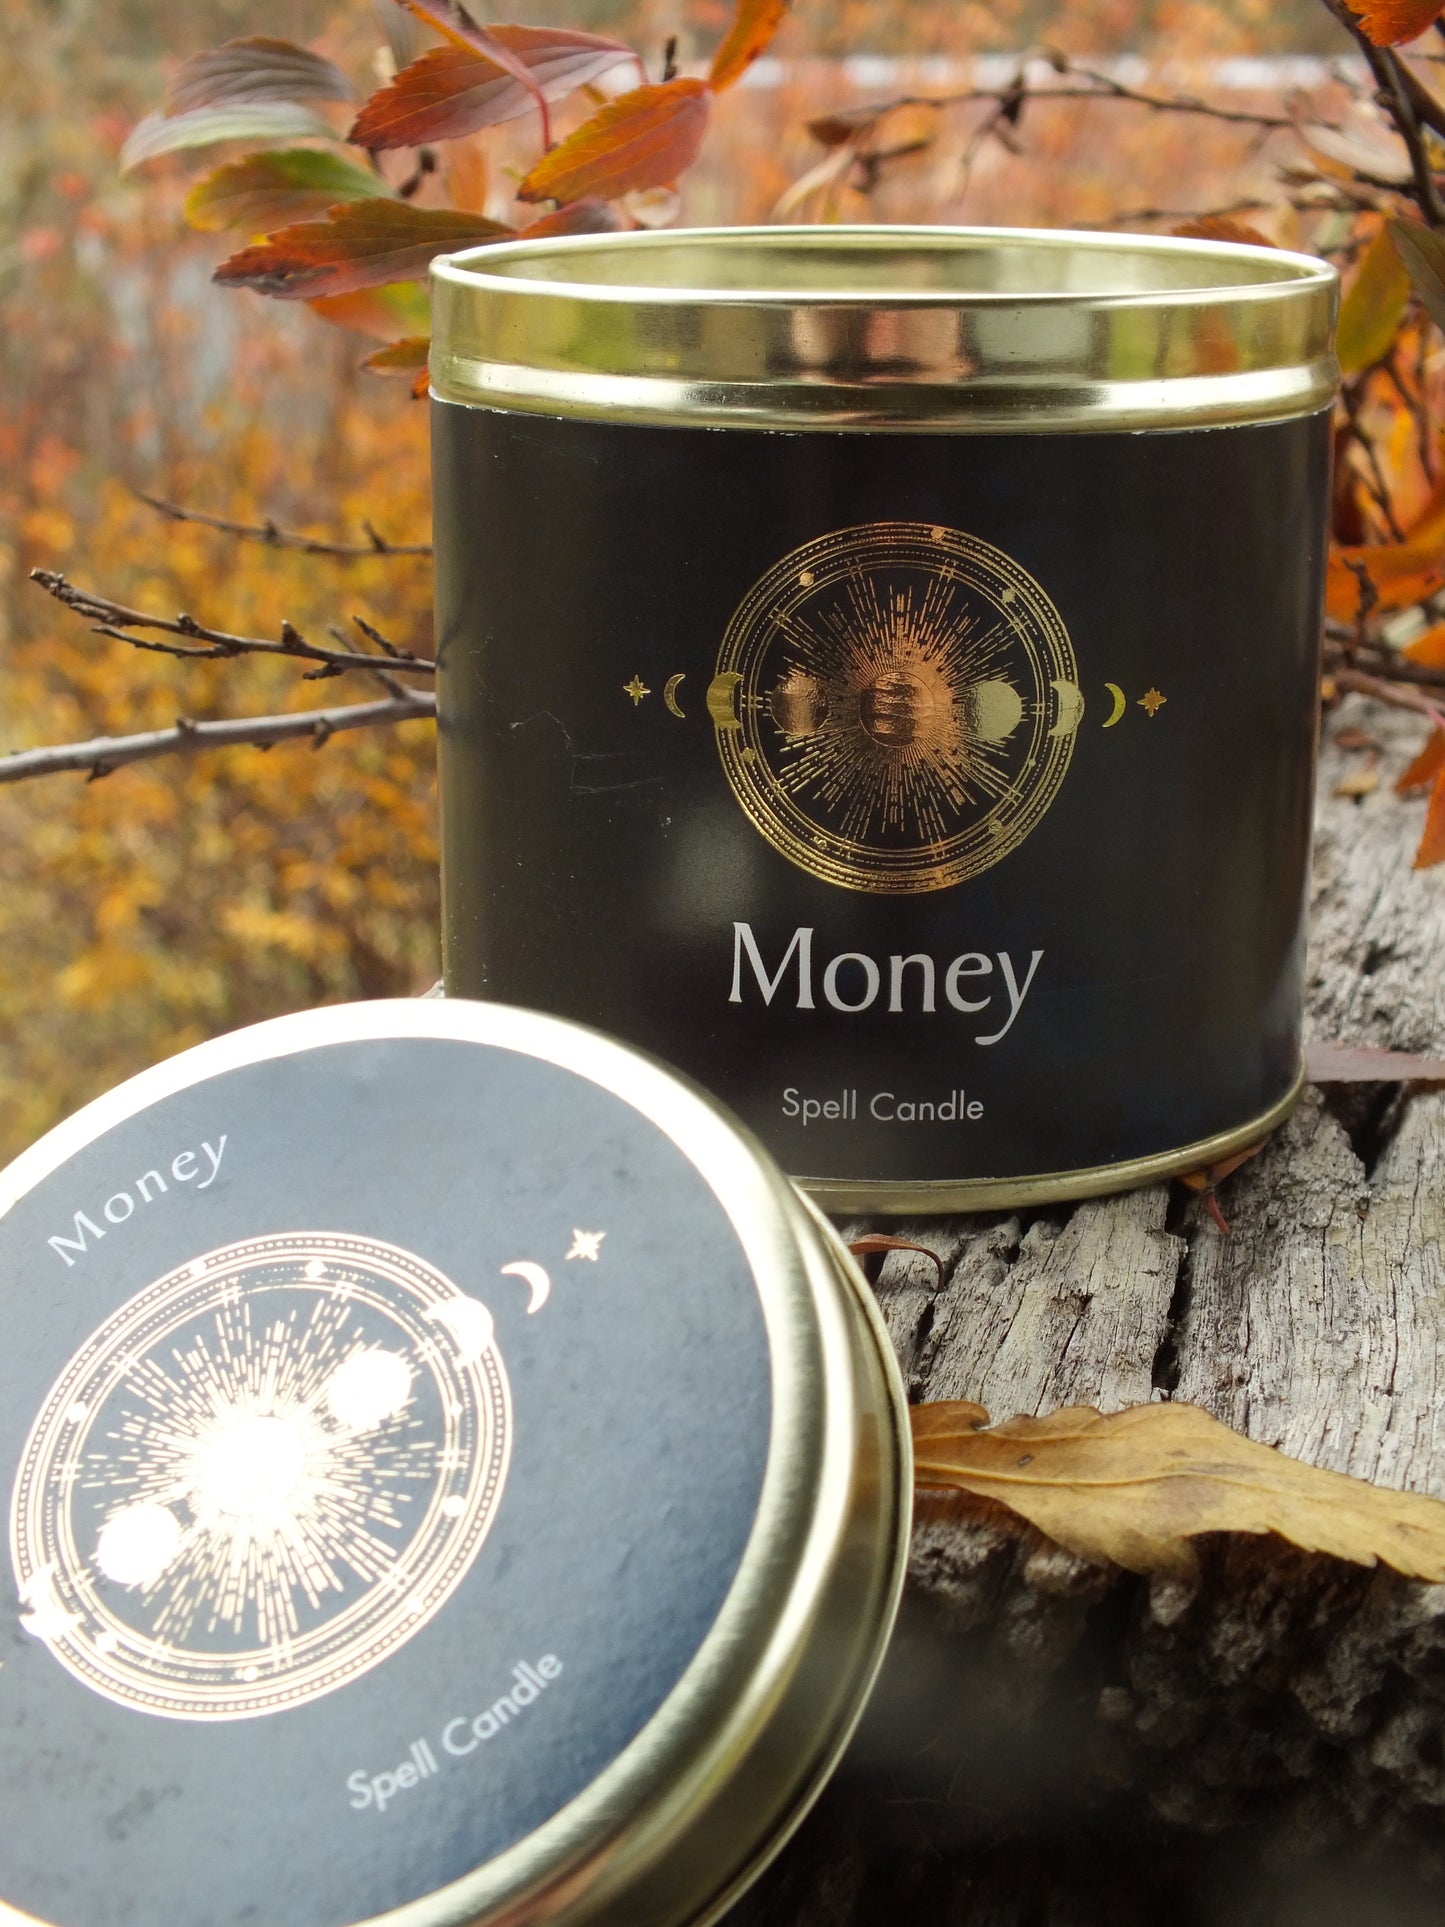 Magic Spell Candle - Money